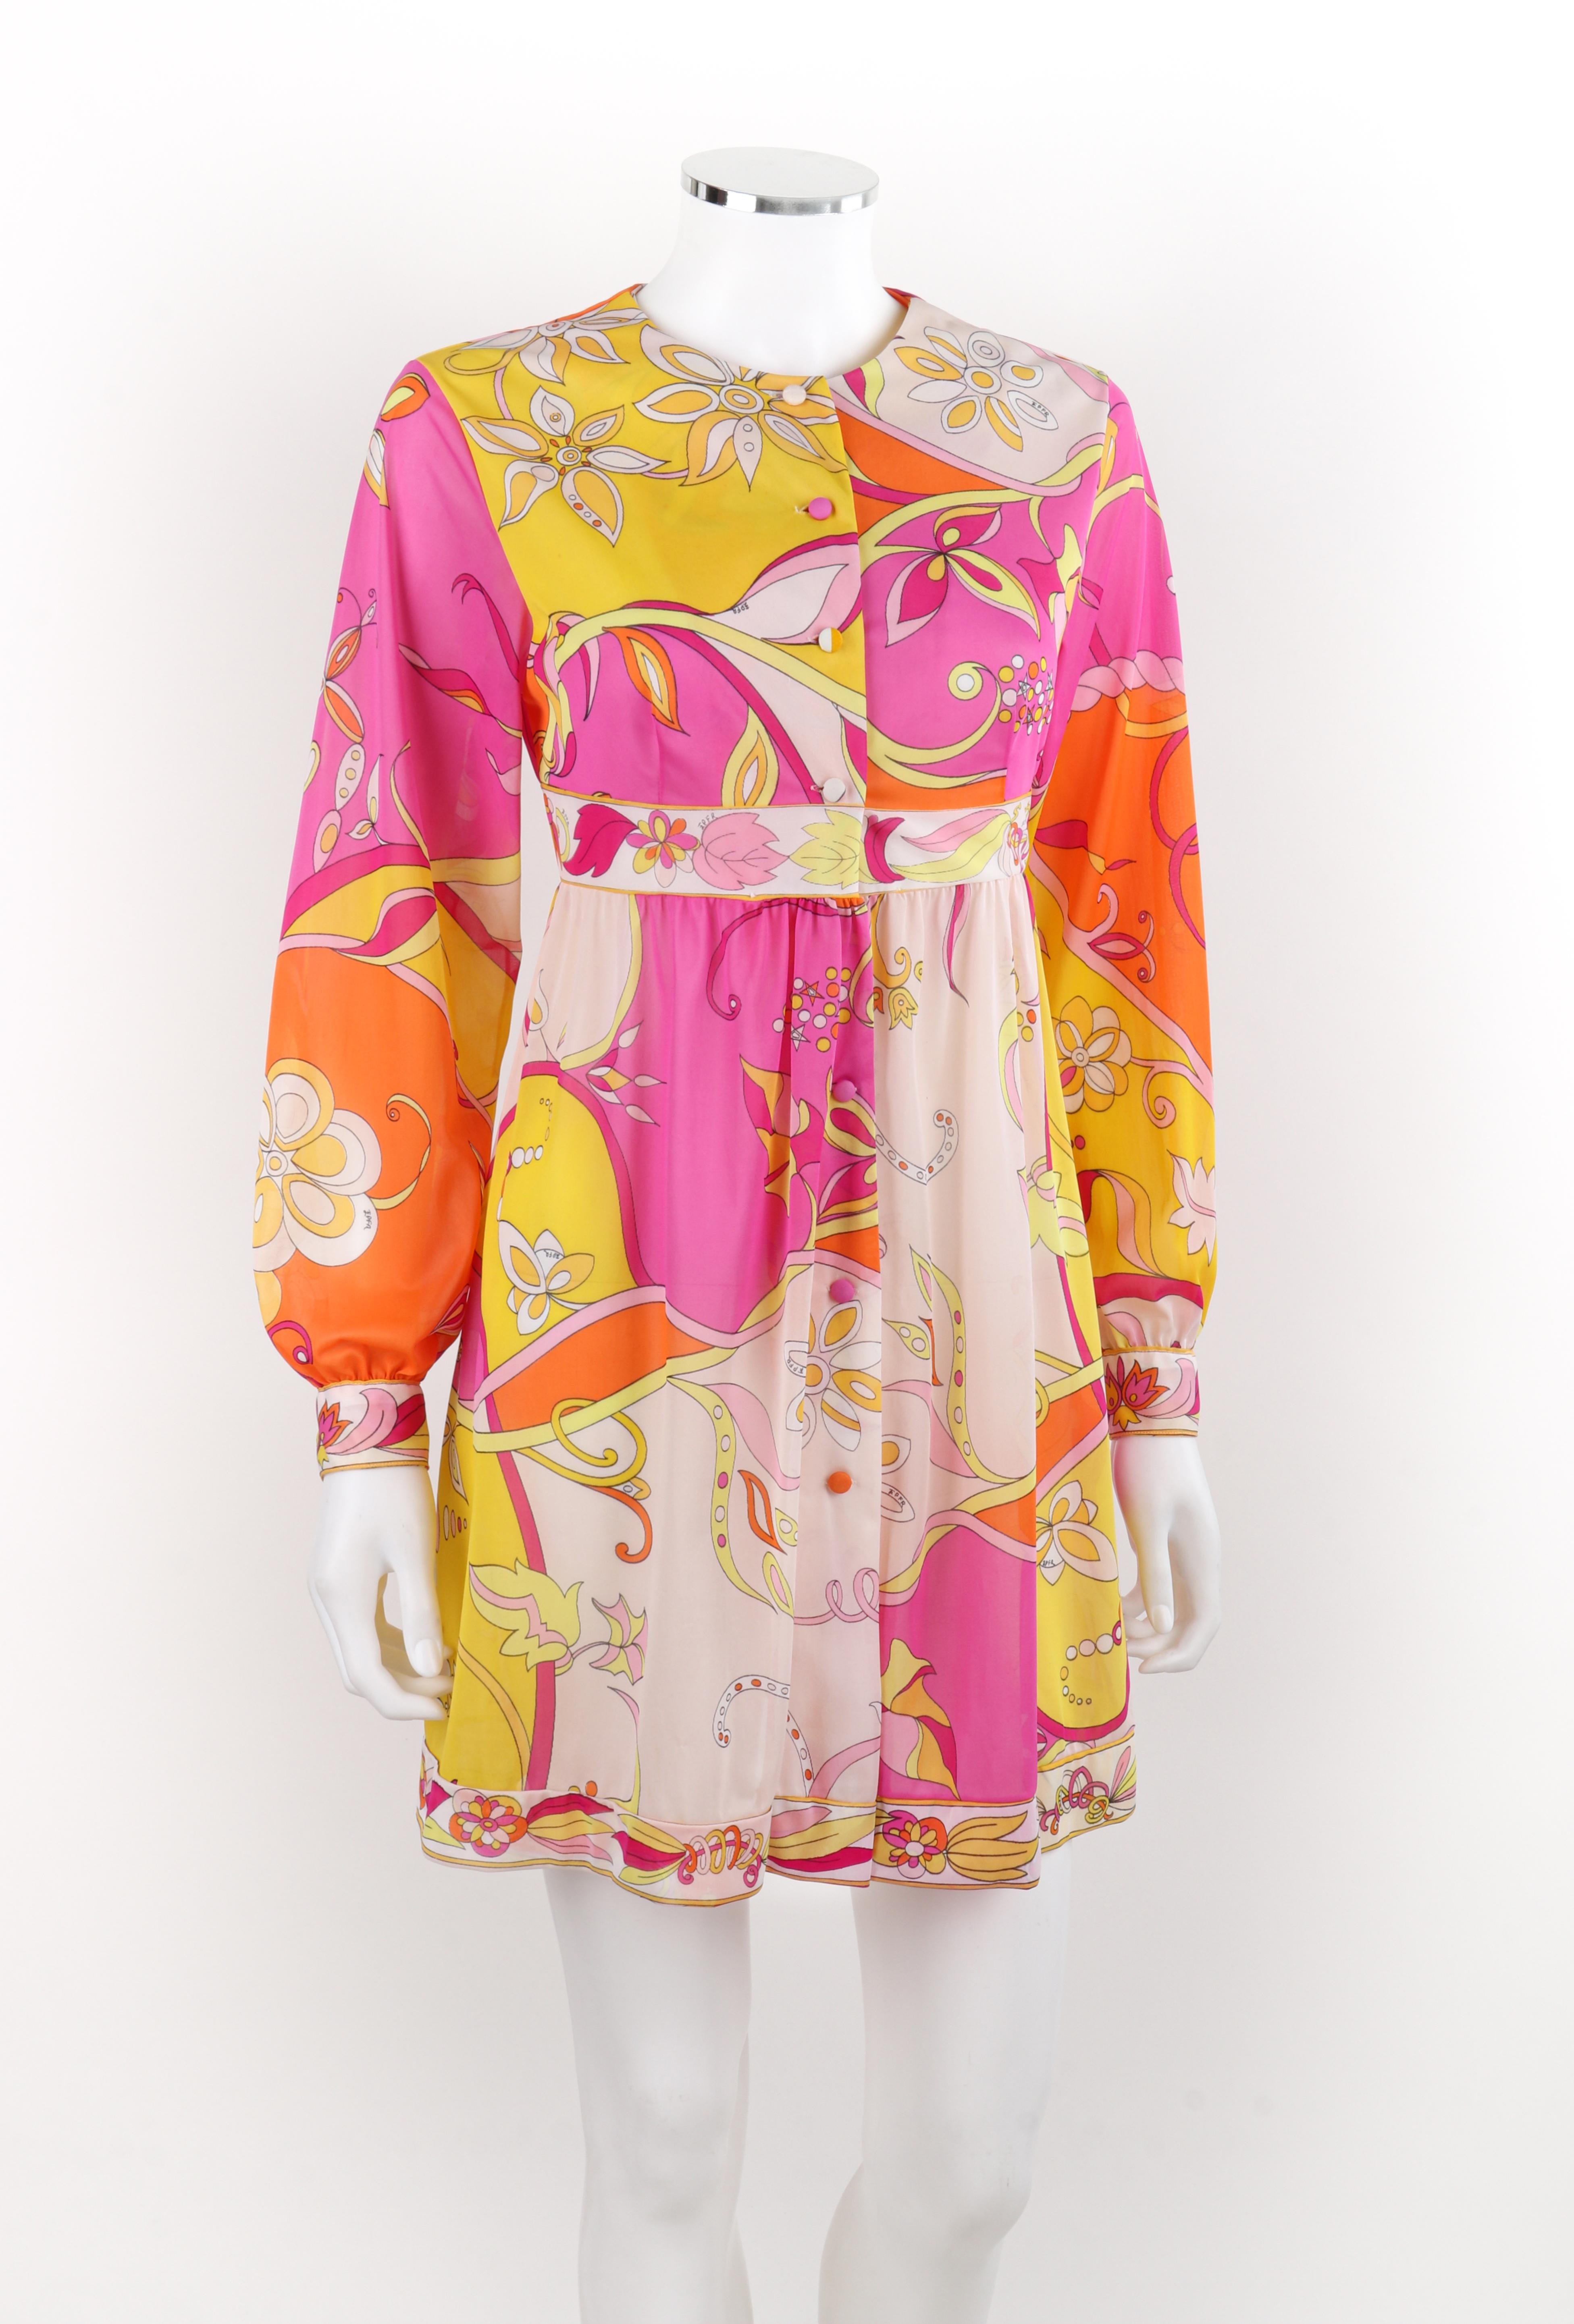 EMILIO PUCCI c.1970s Multicolor Silk Floral Pattern Button Down Babydoll Dress  In Good Condition For Sale In Thiensville, WI